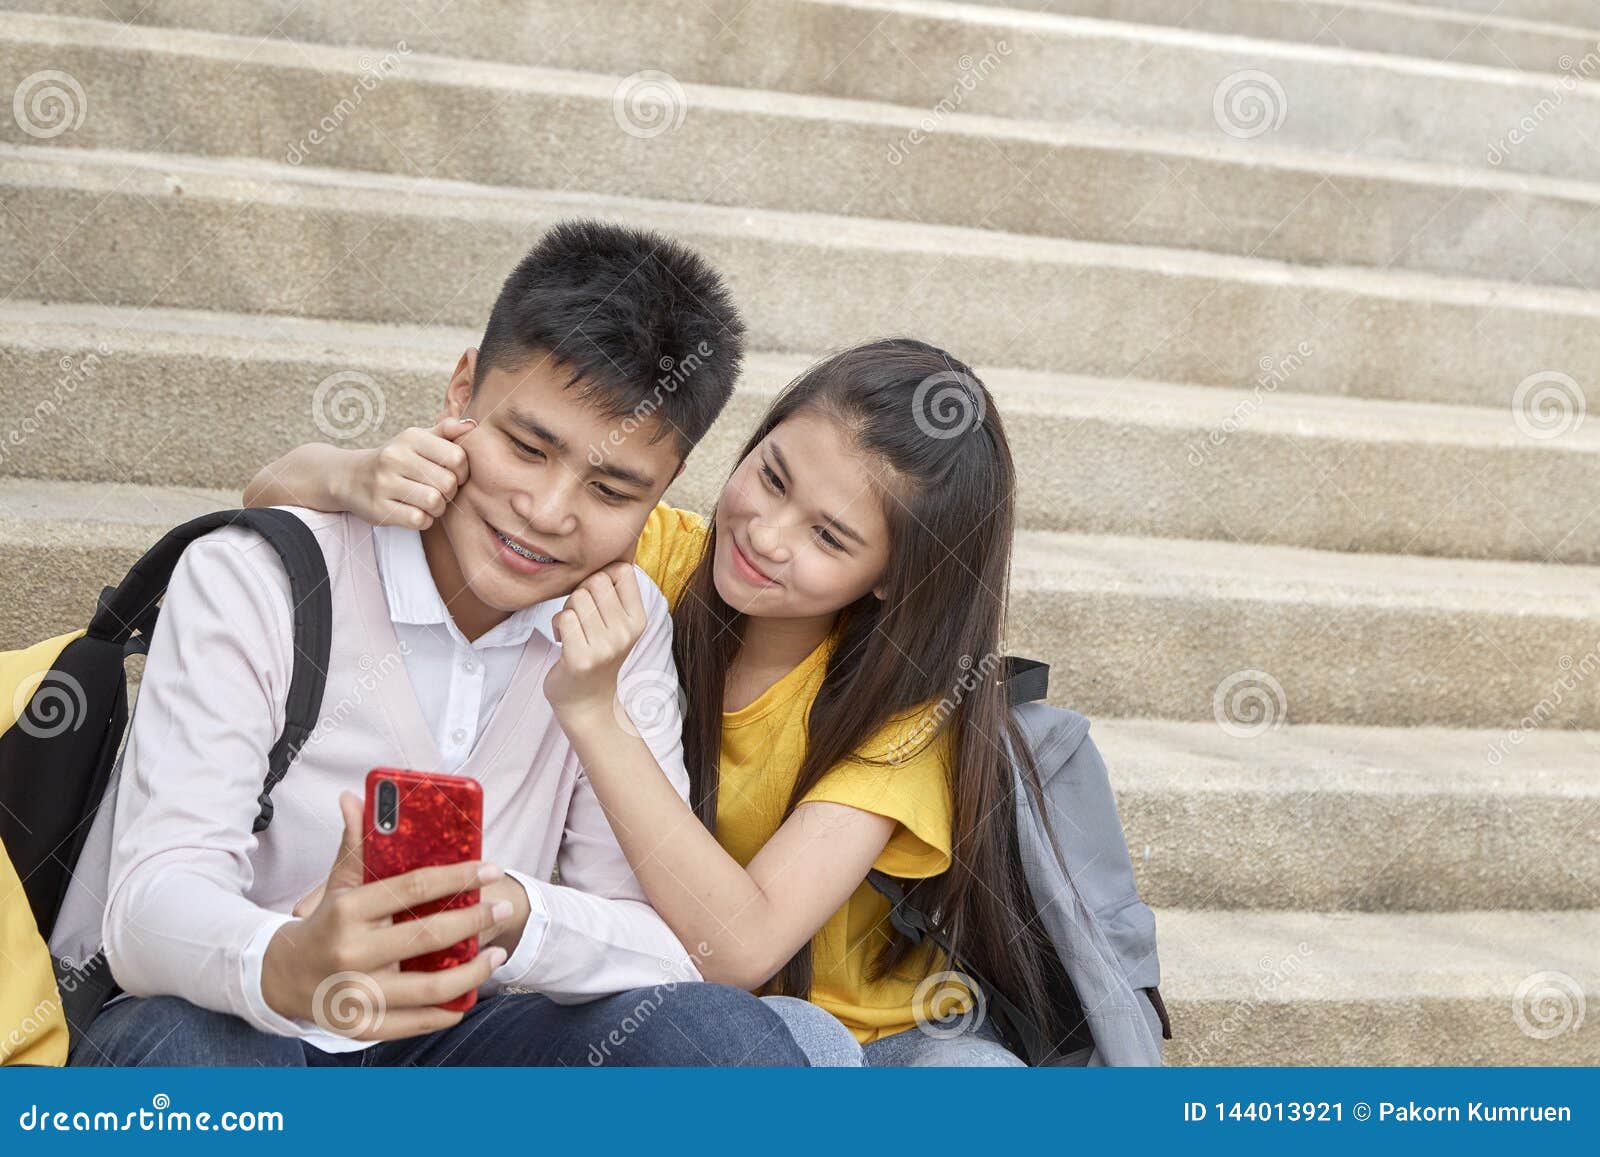 Selfie-portrait of Funny Couple Outdoor Stock Image - Image of city ...